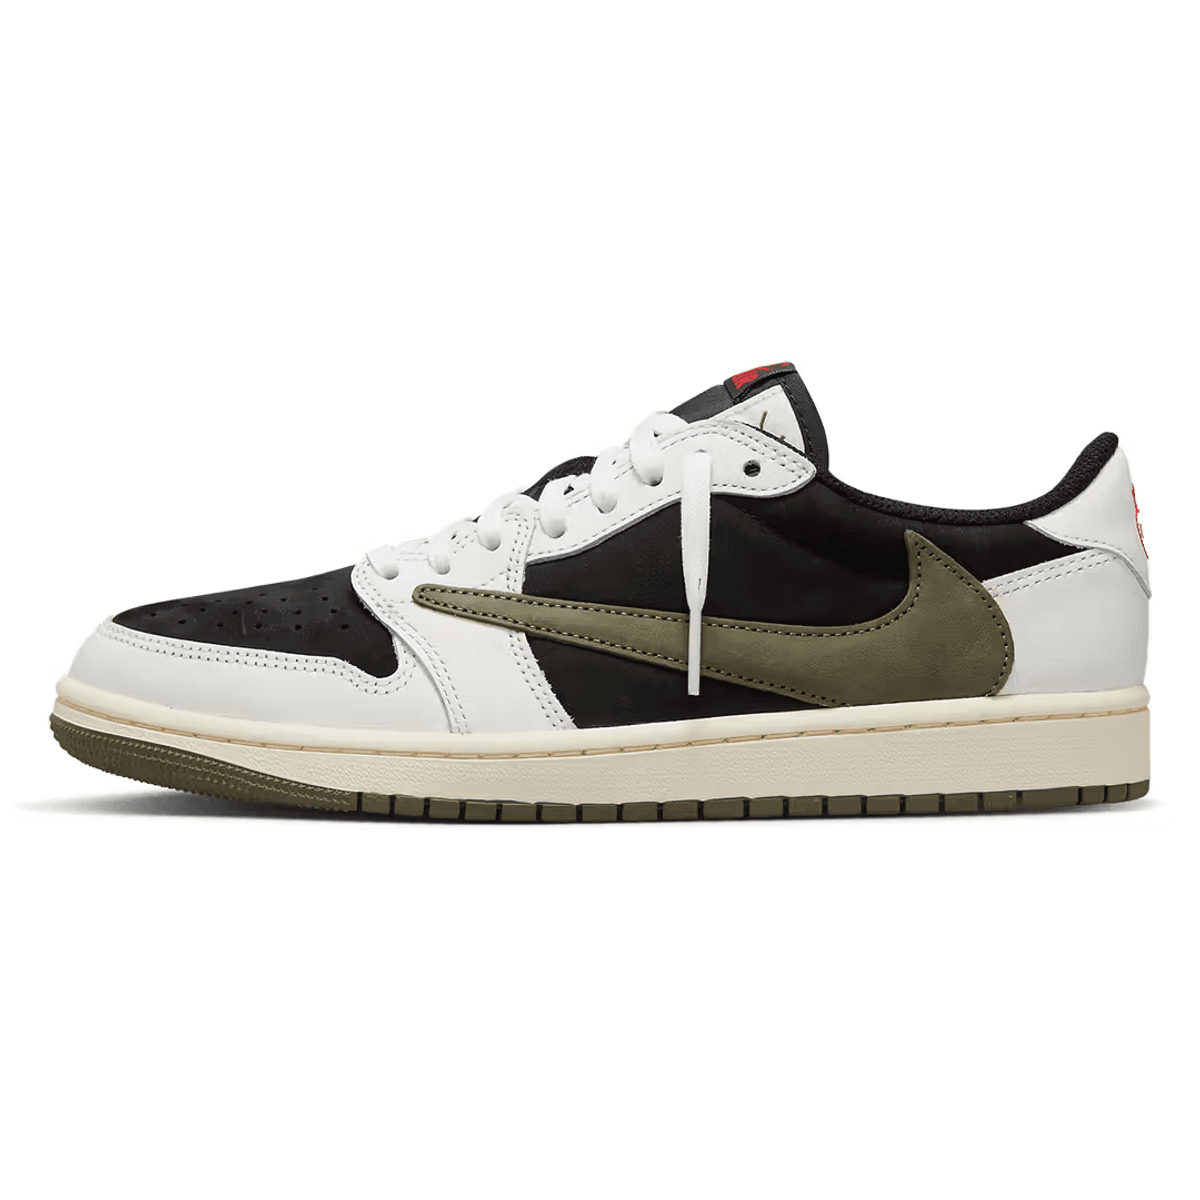 How To Buy The Travis Scott x Air Jordan 1 Low Olive For Retail